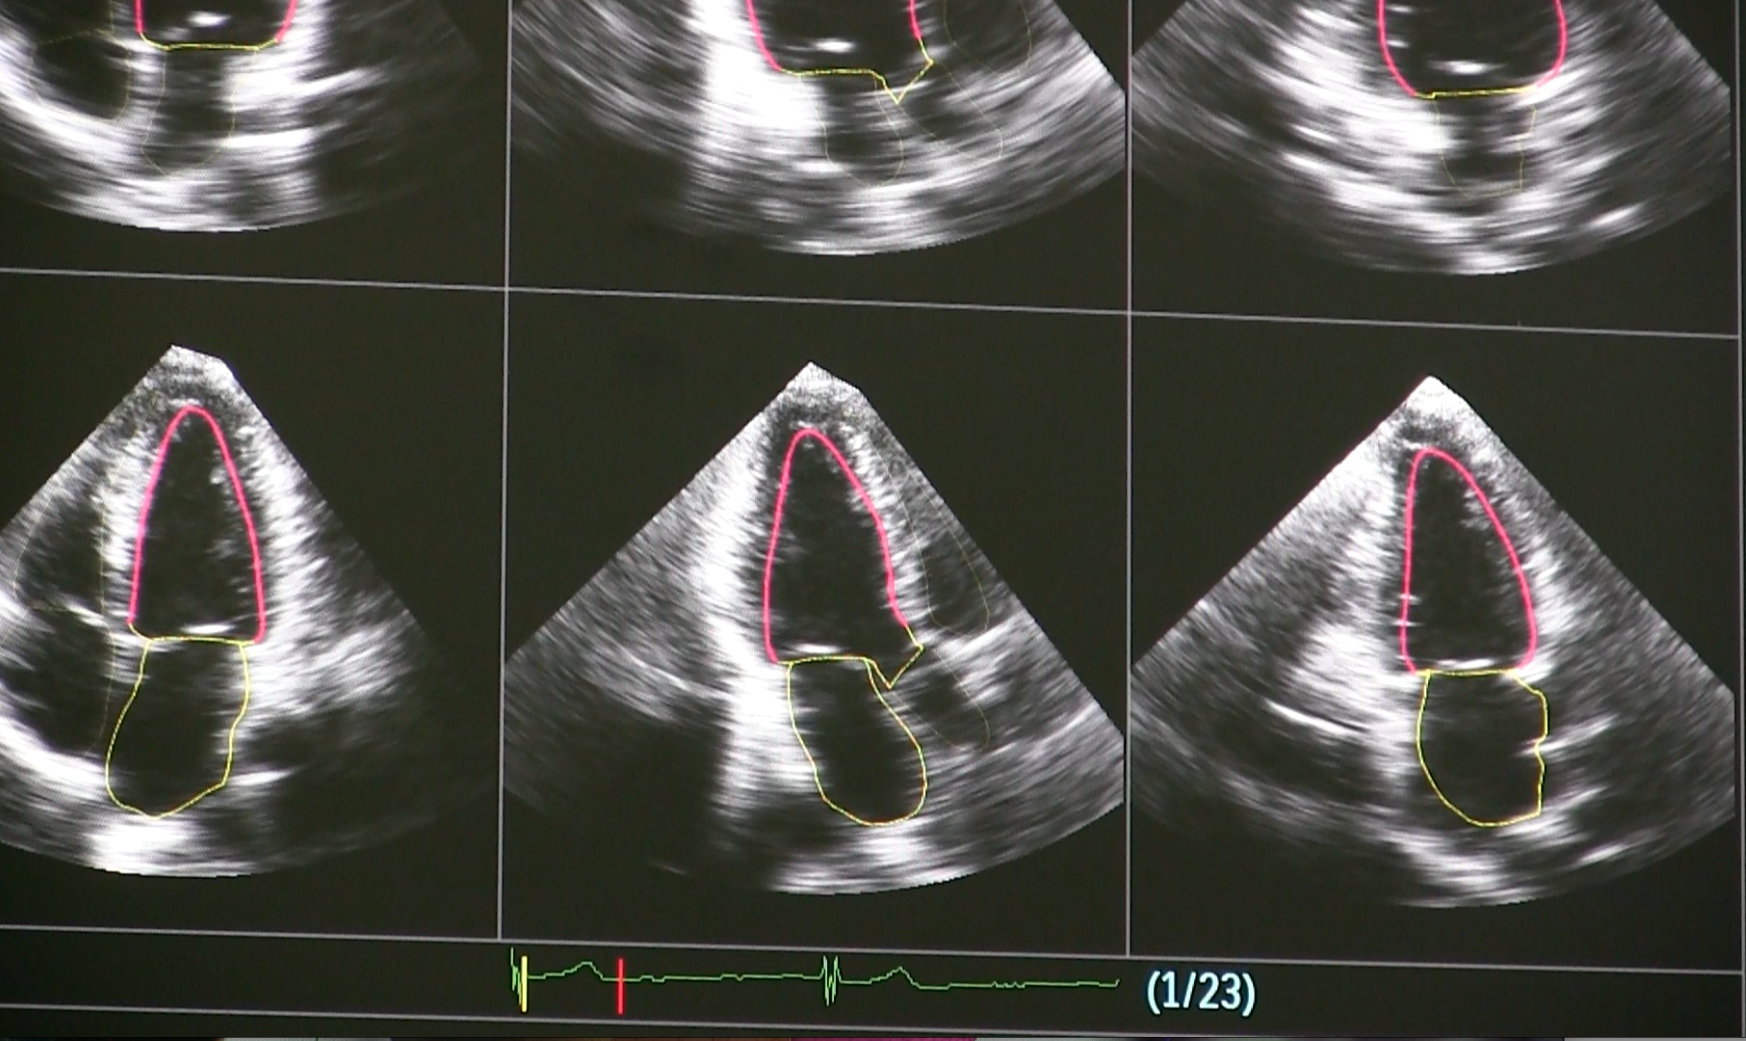 Philips Epiq Ultrasound uses artificial intelligence to automate standard echo views.